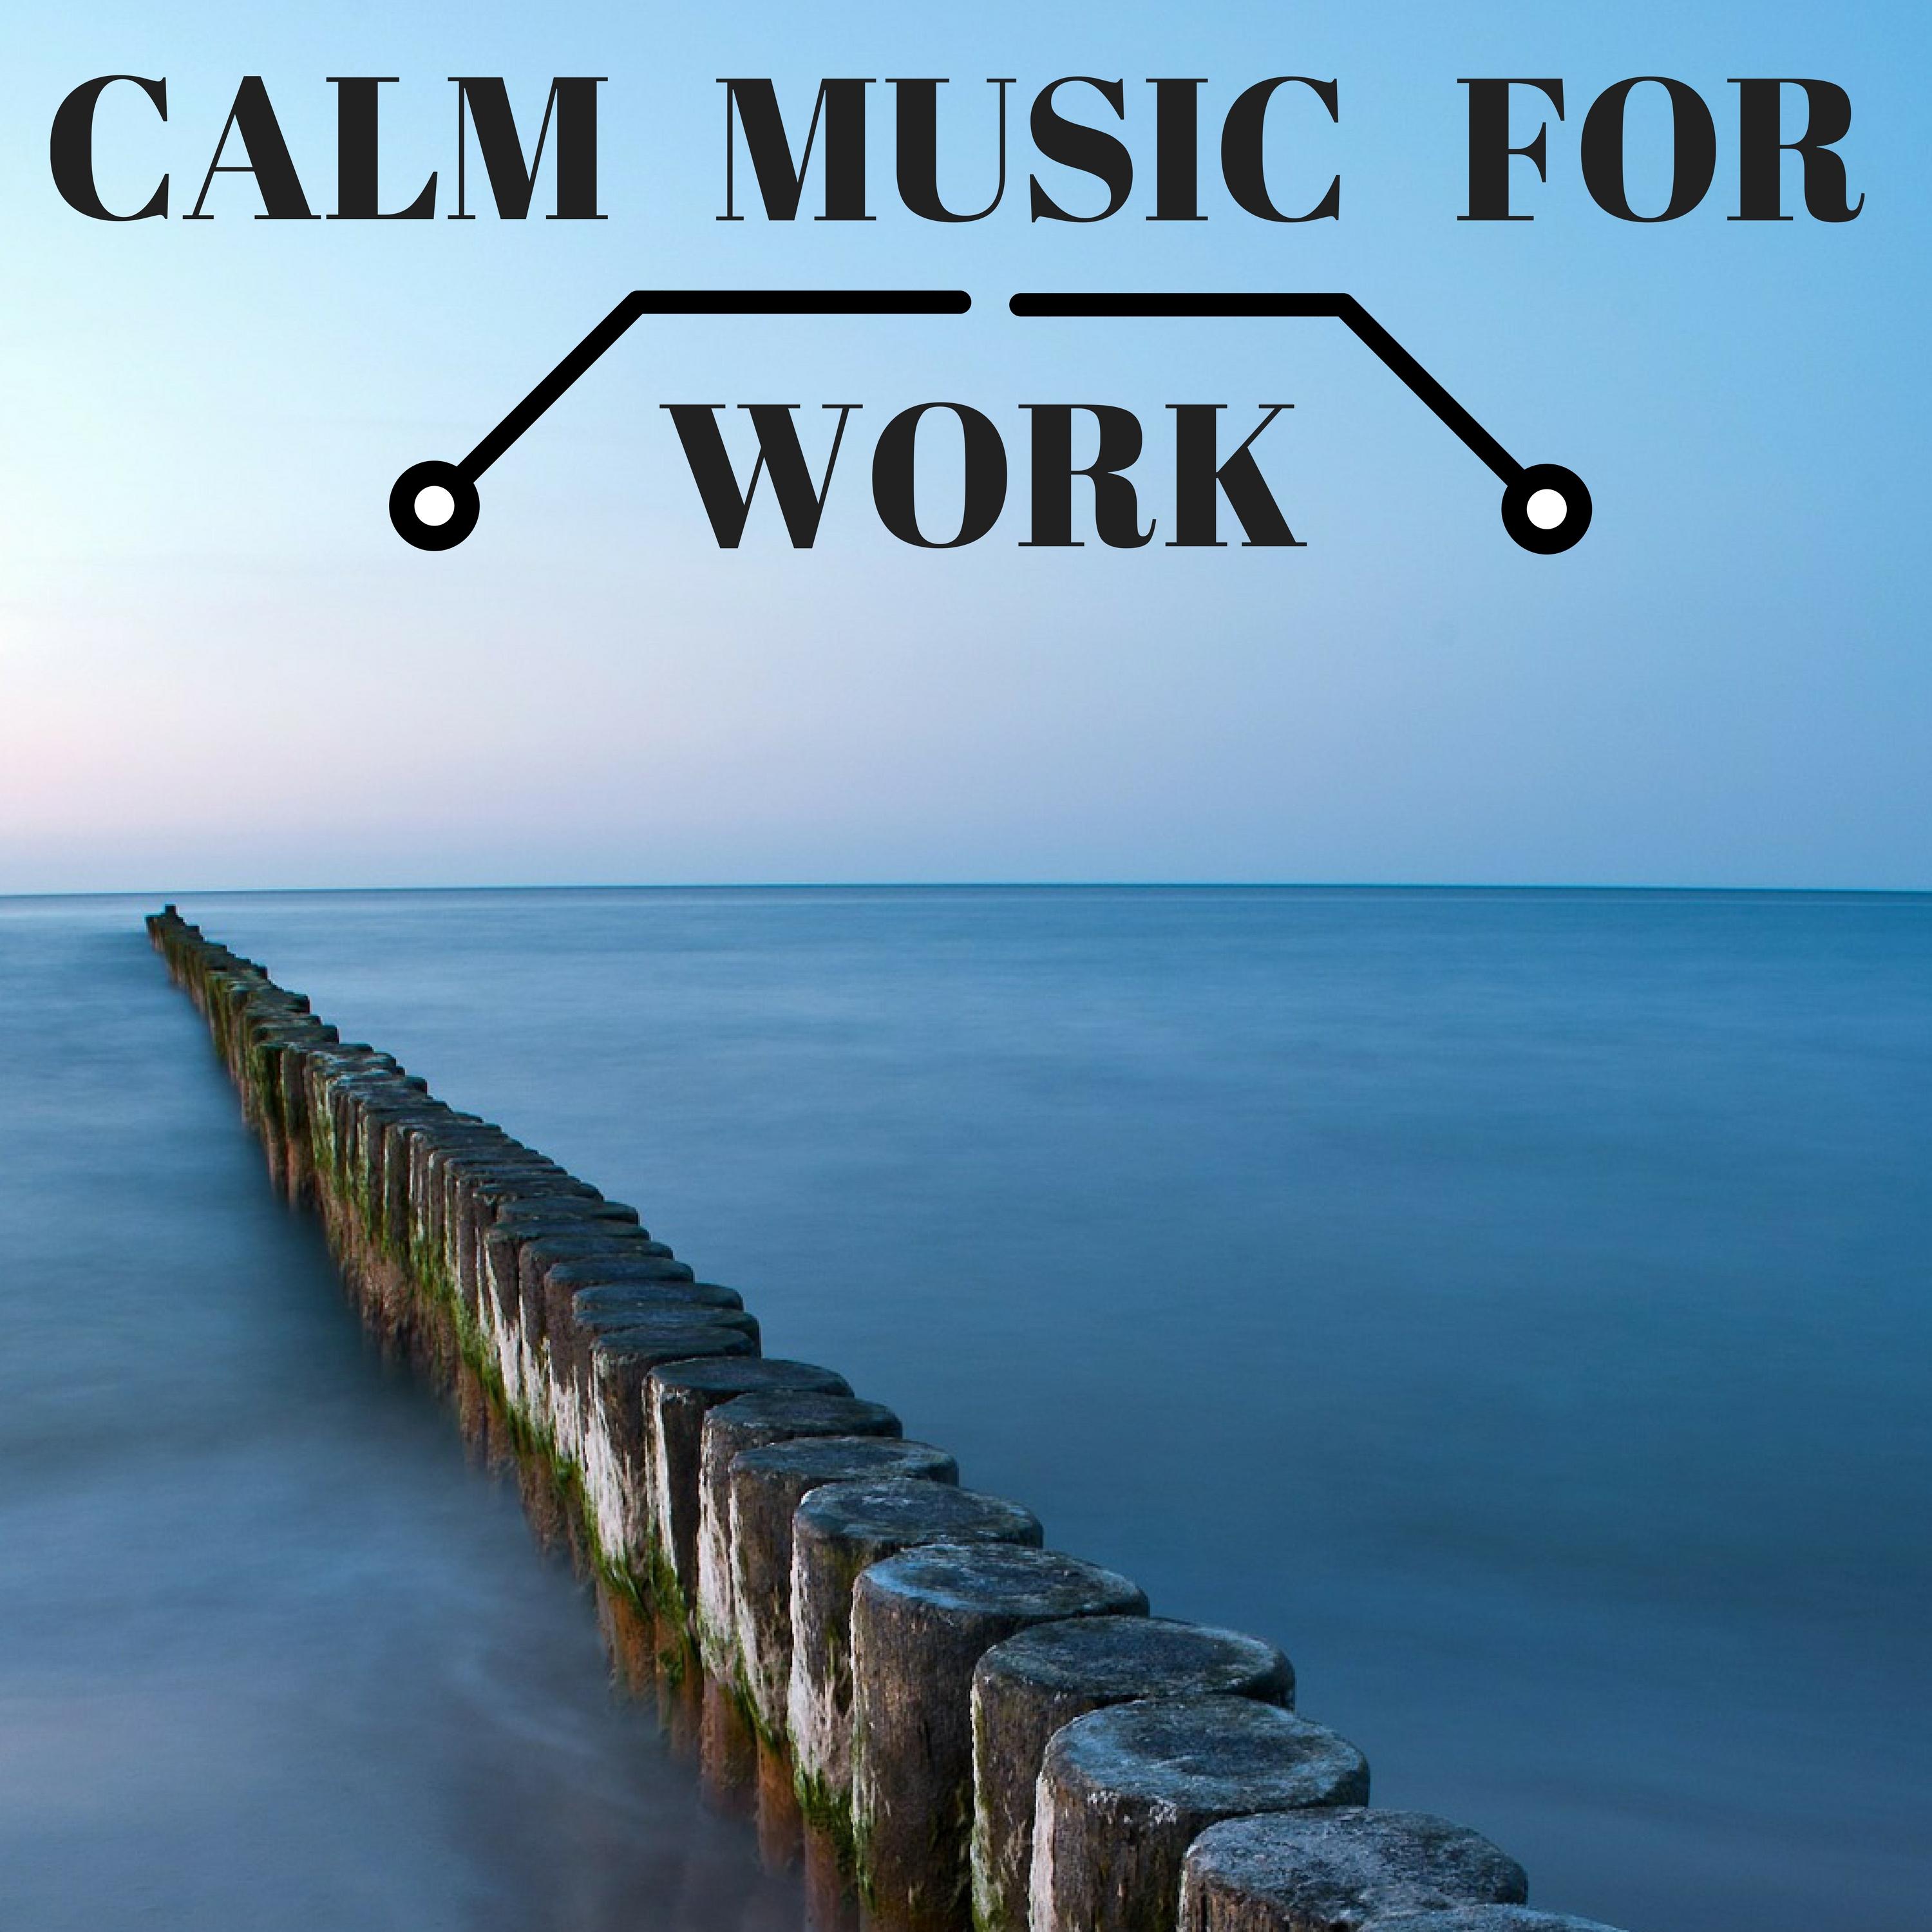 Calm Music for Work - Relaxation Sounds for the Morning